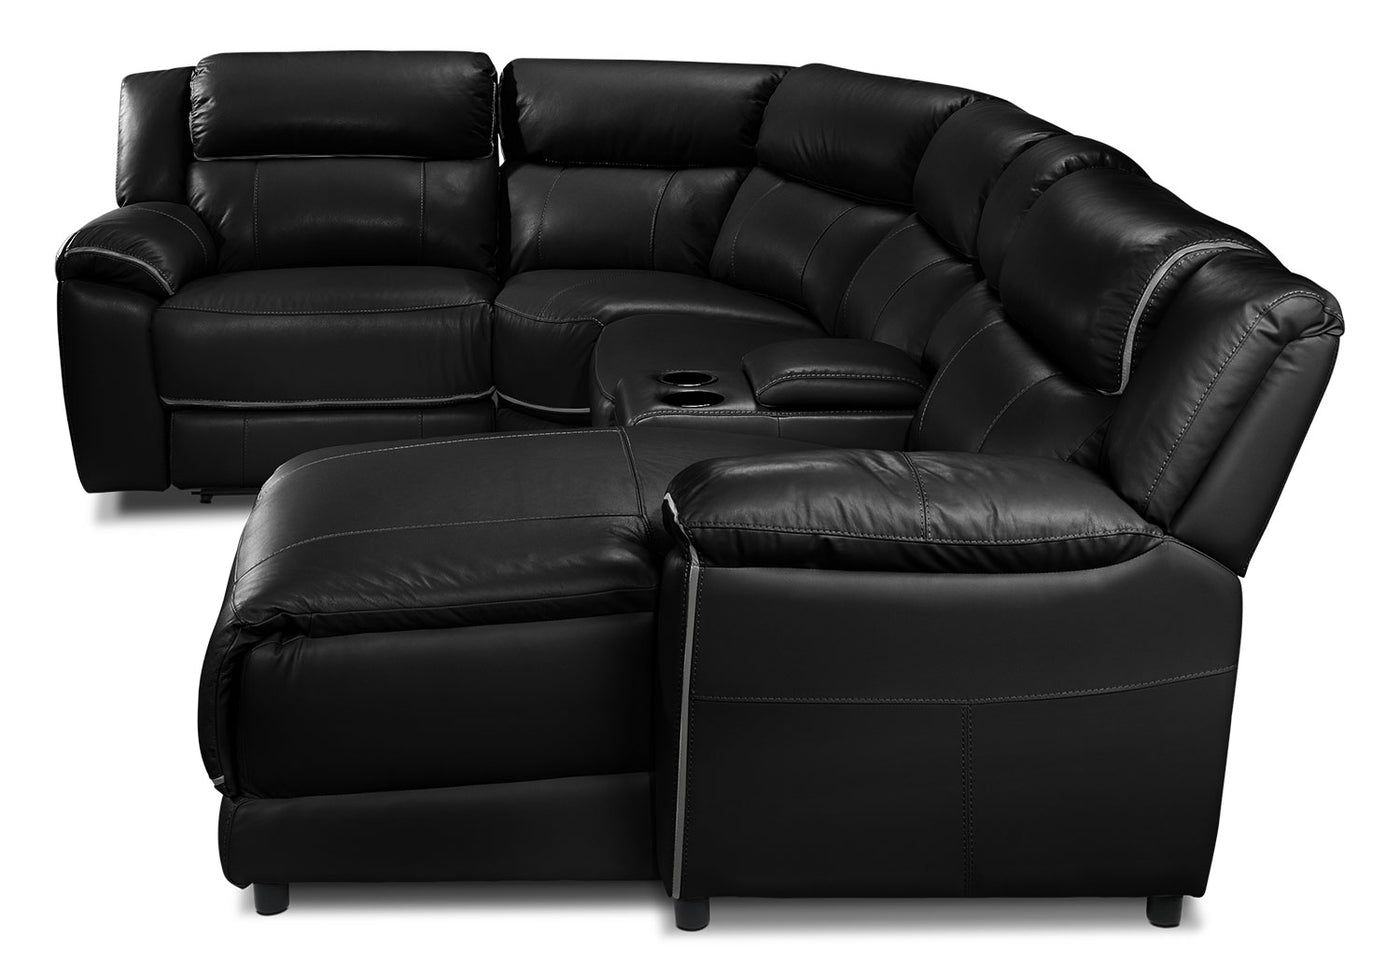 Holton Leather 5-Piece Sectional with Right-Facing Chaise - Black